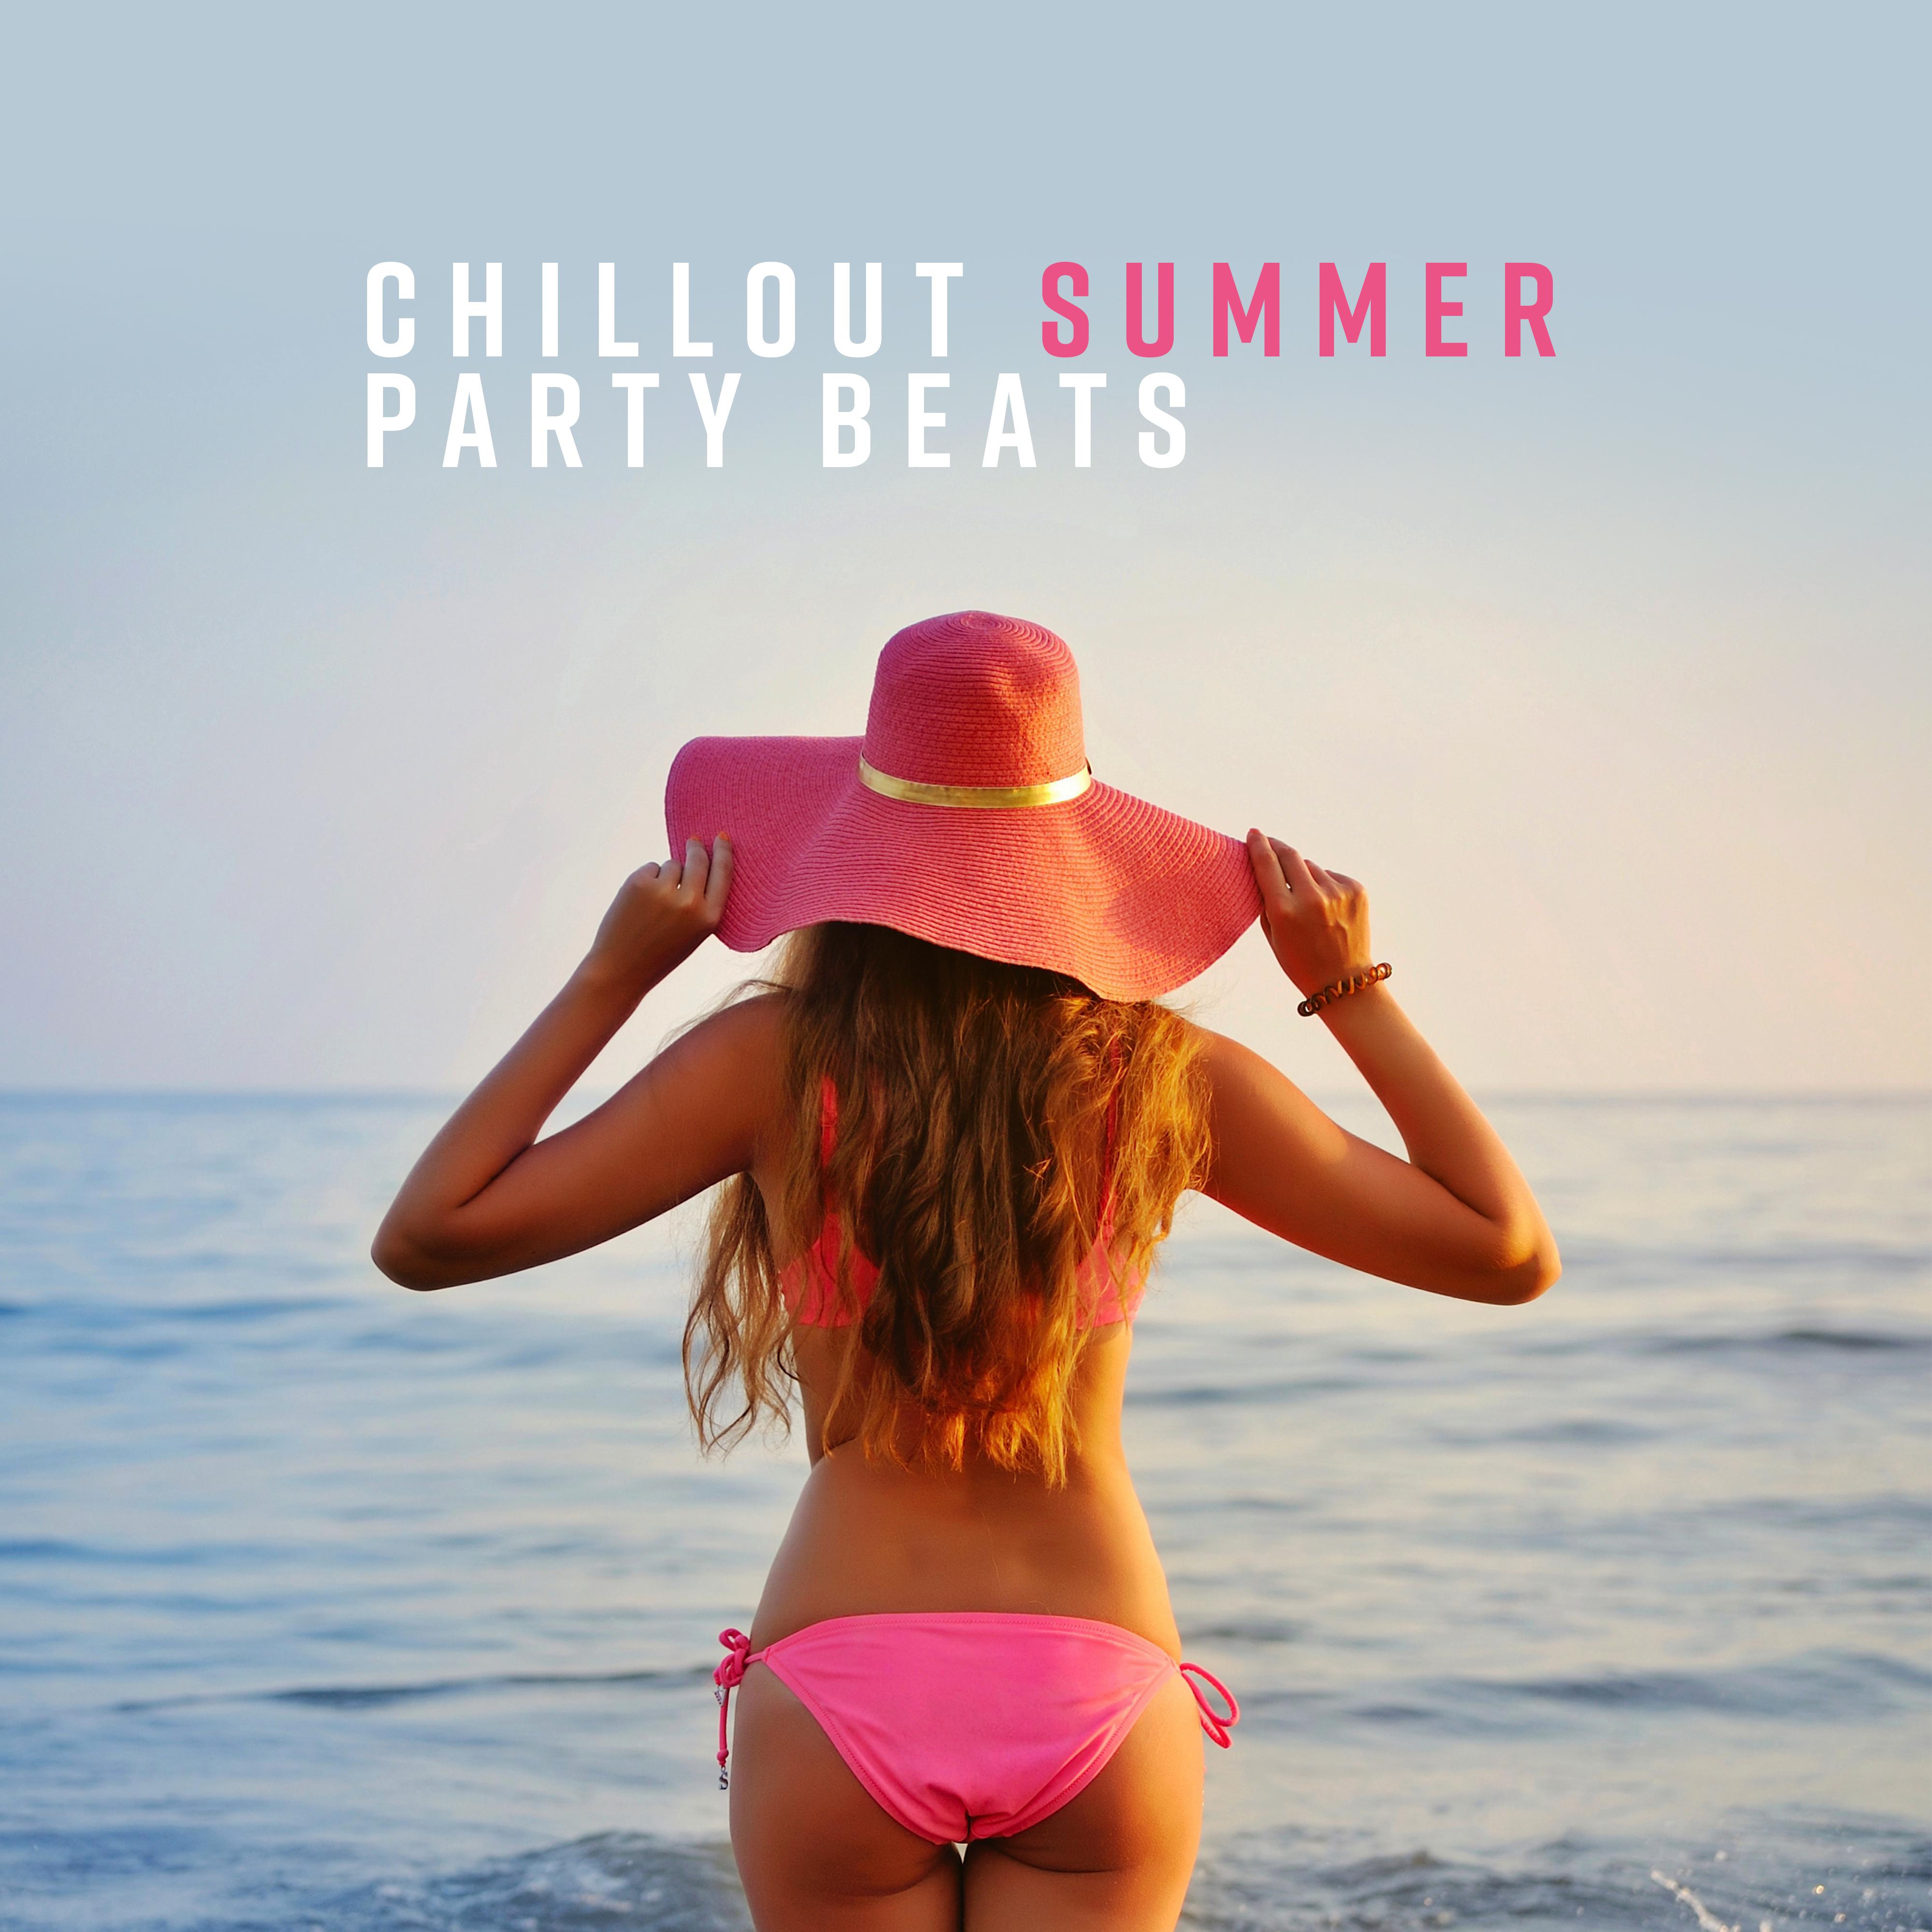 Chillout Summer Party Beats